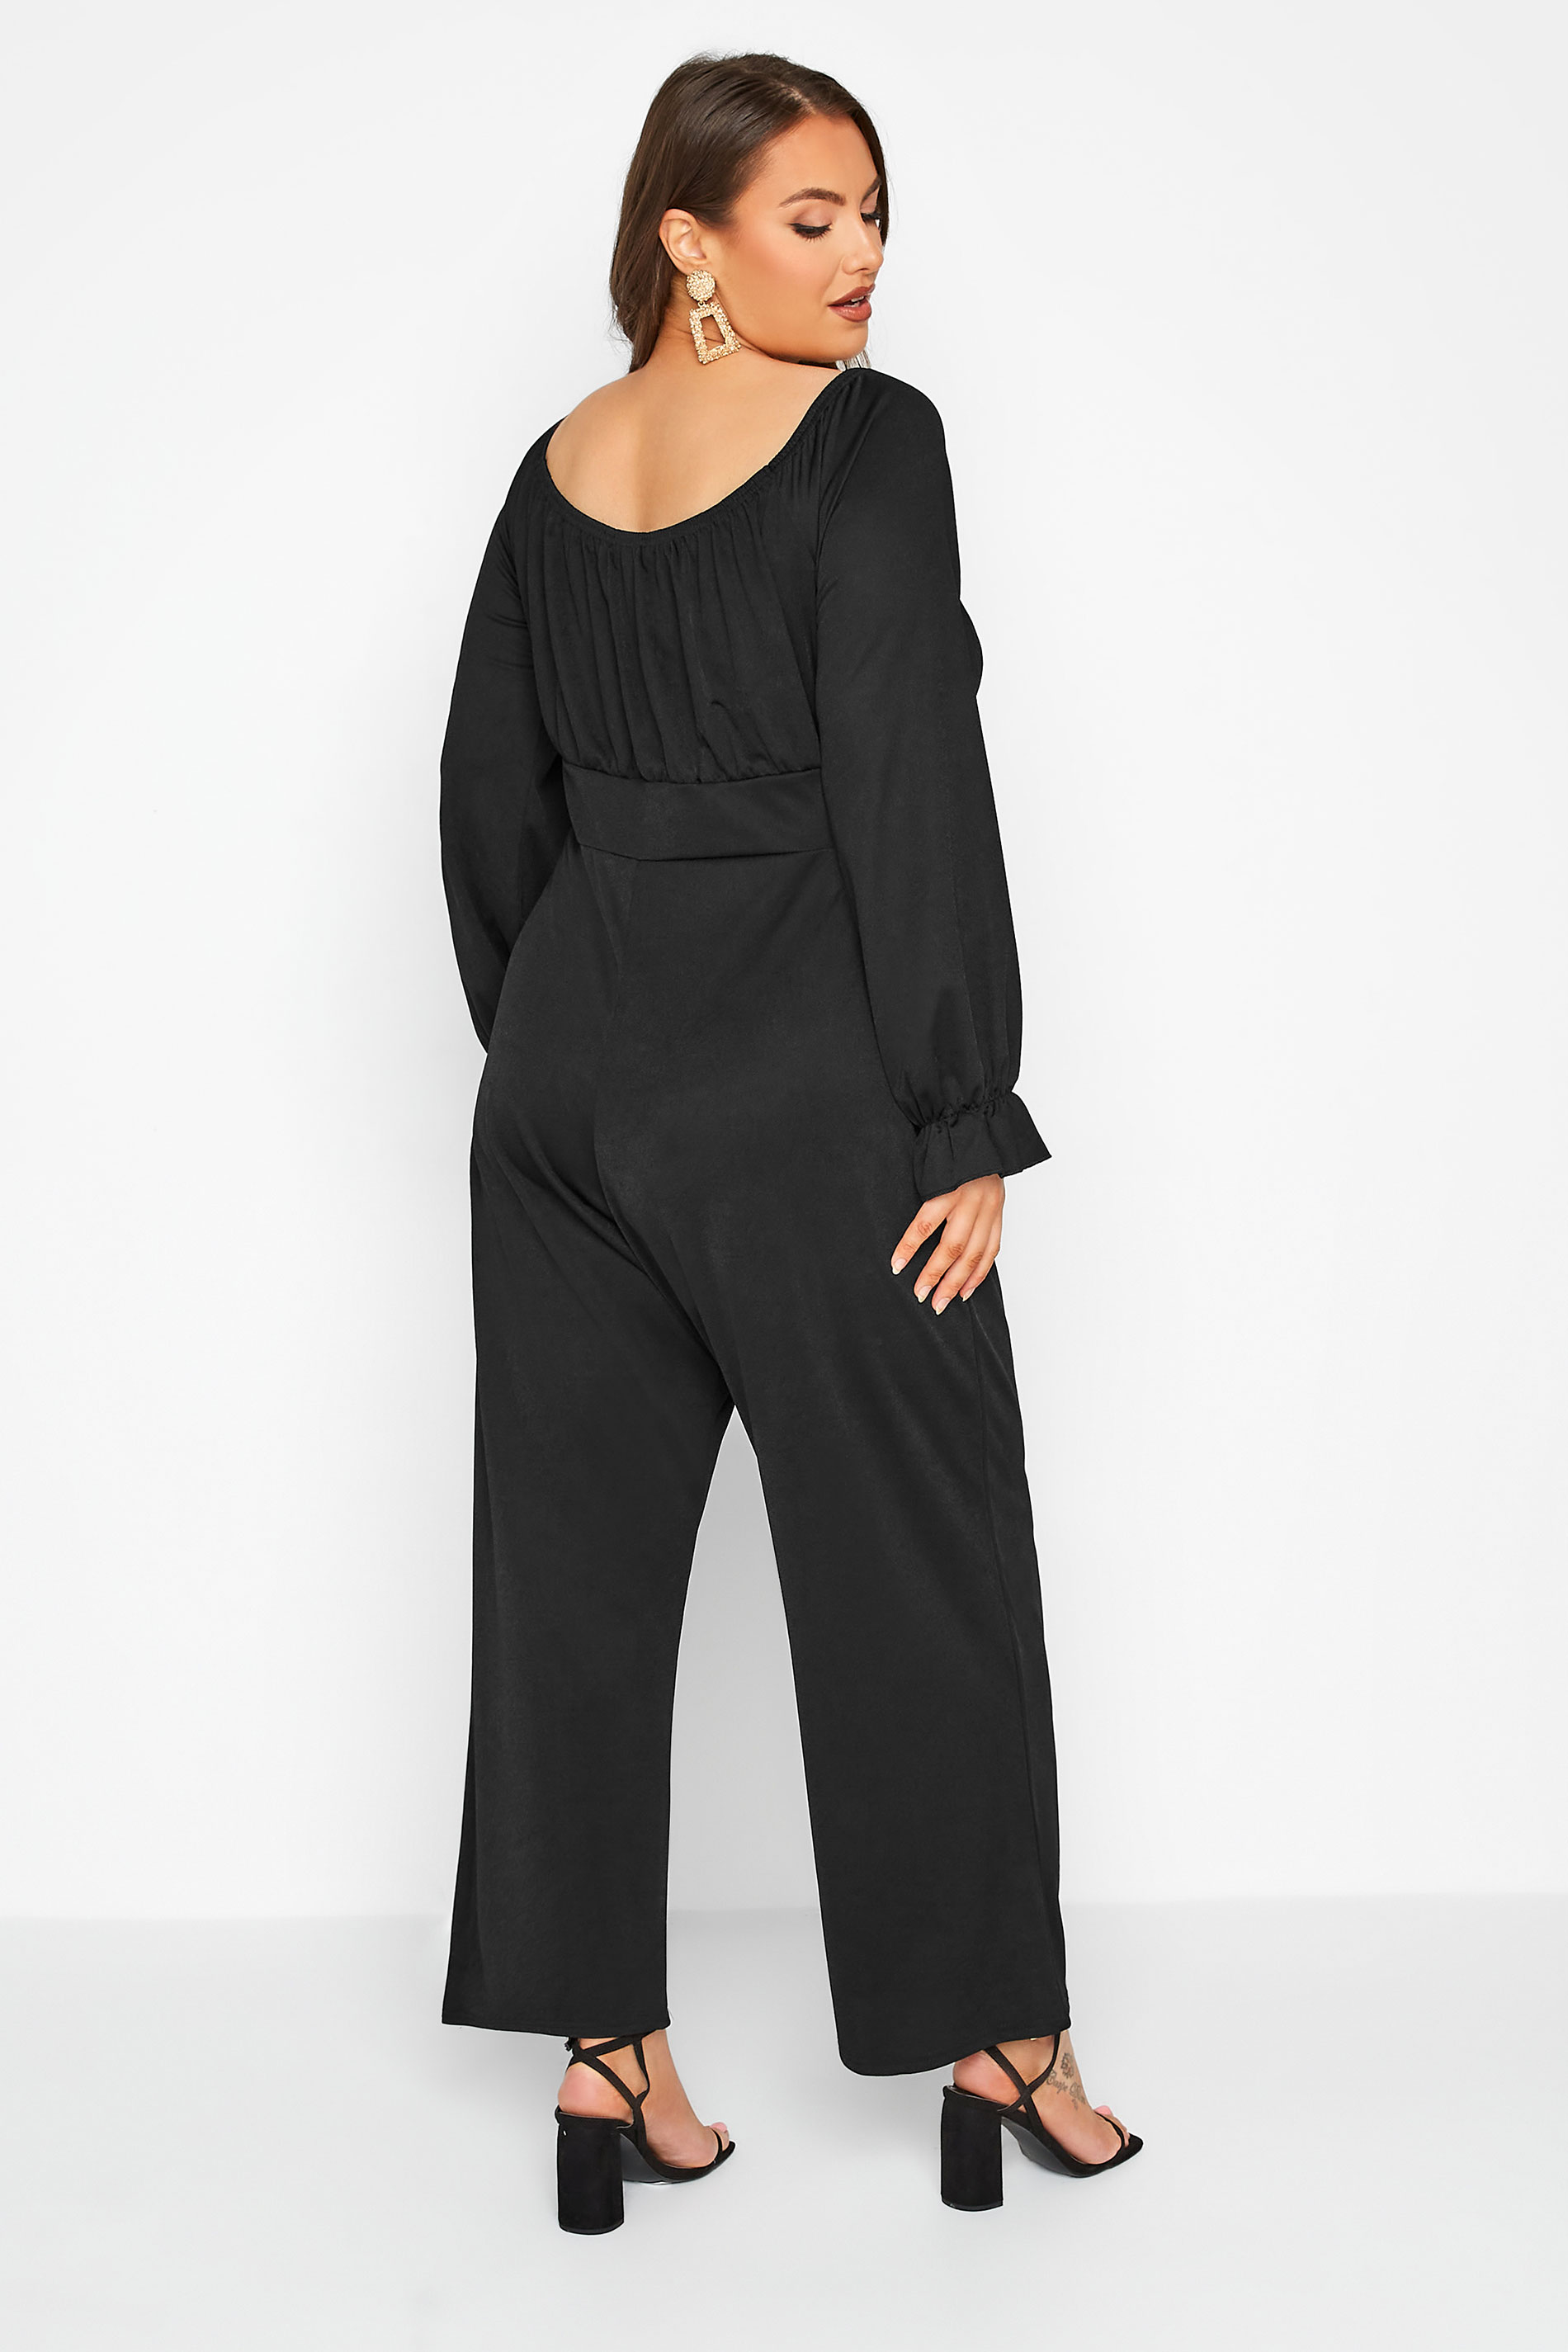 LIMITED COLLECTION Curve Black Corset Long Sleeve Jumpsuit | Yours Clothing 3